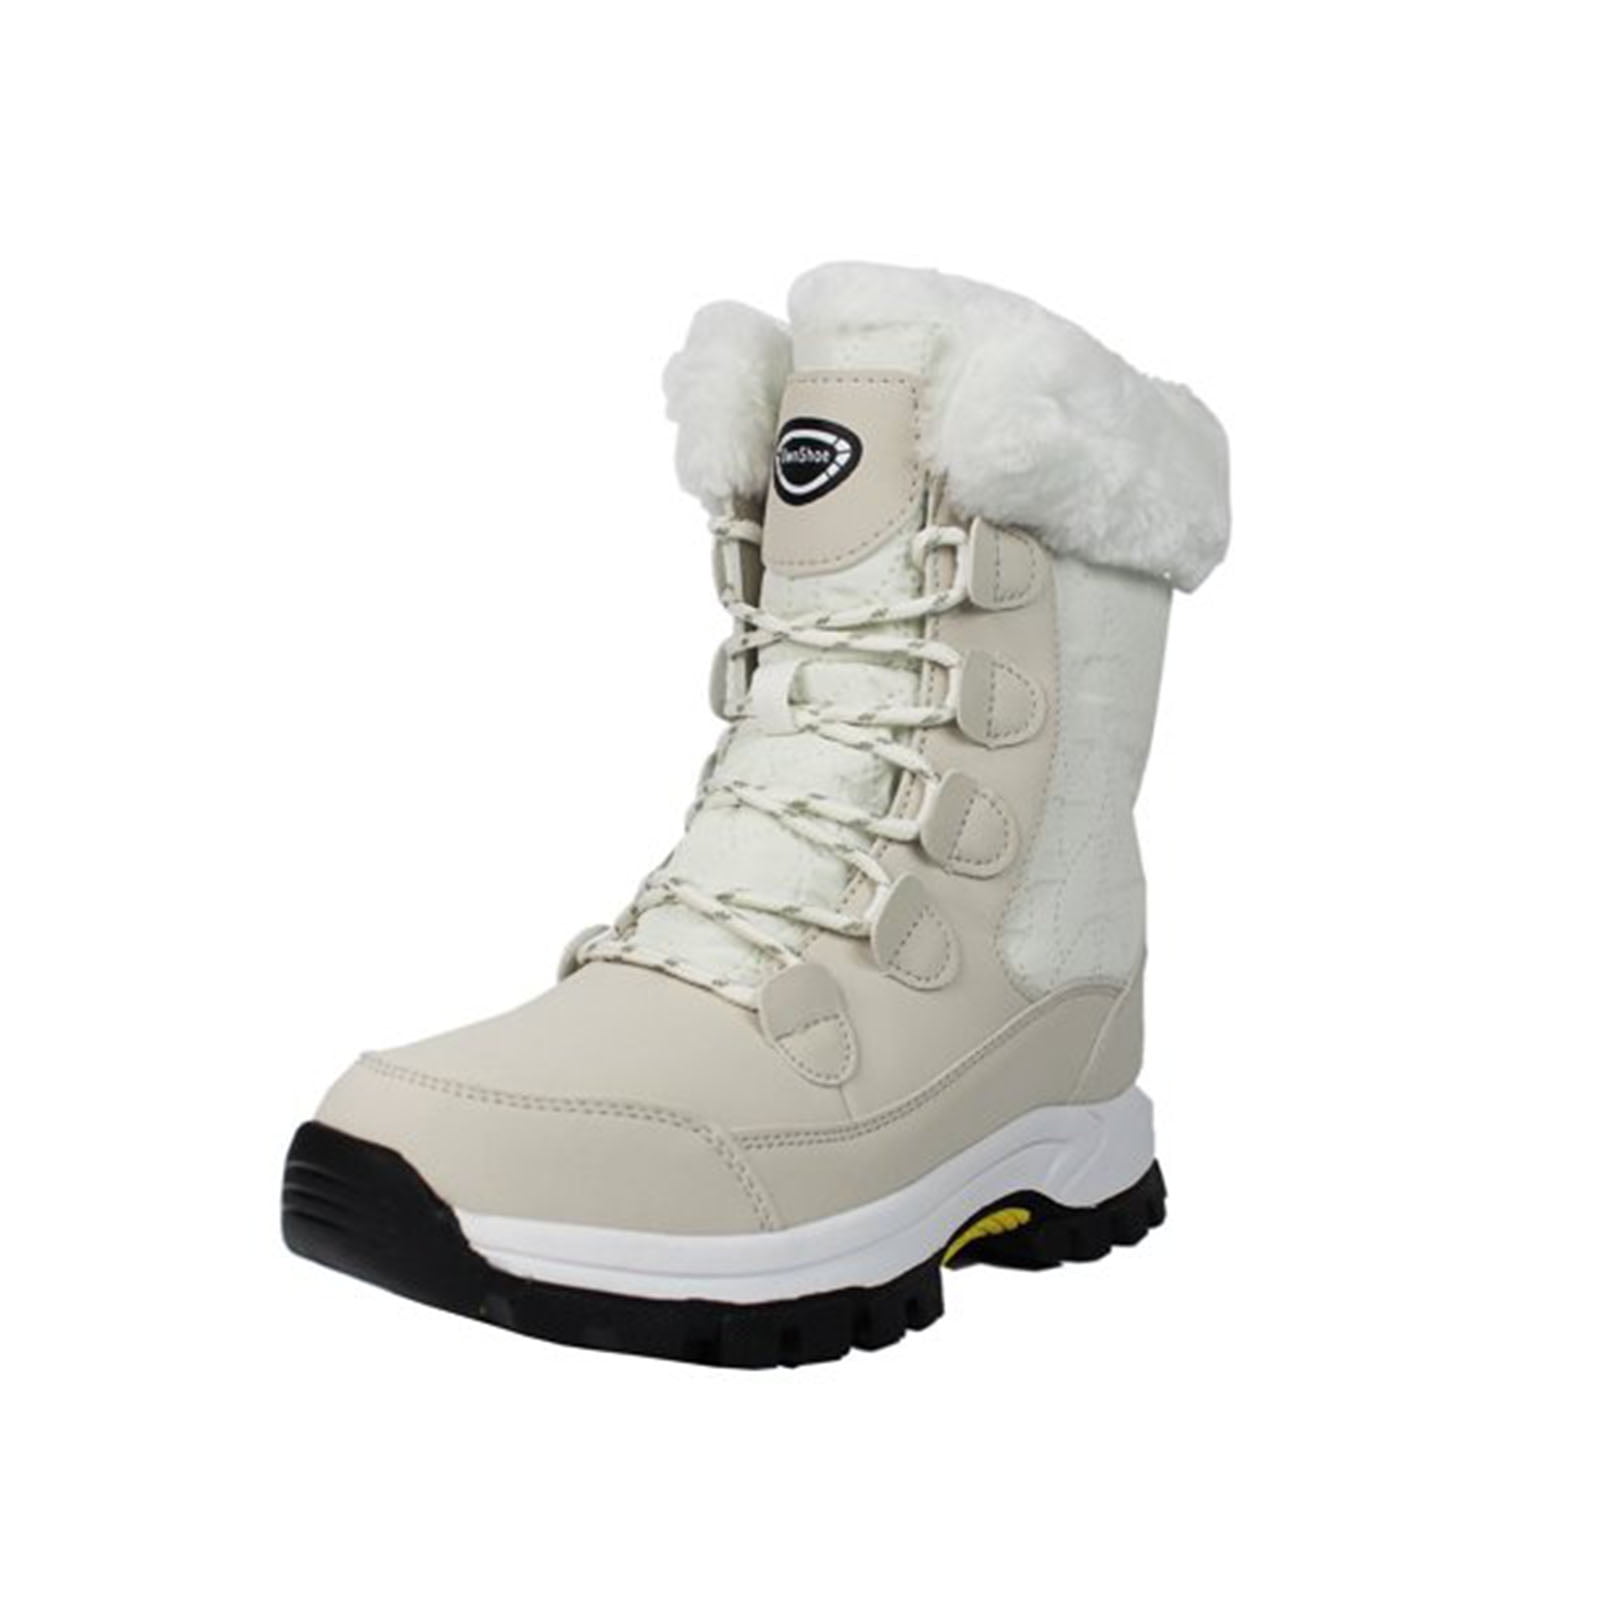 Winter Warm Snow Boots for Women Comfortable Outdoor Snow Shoes ...